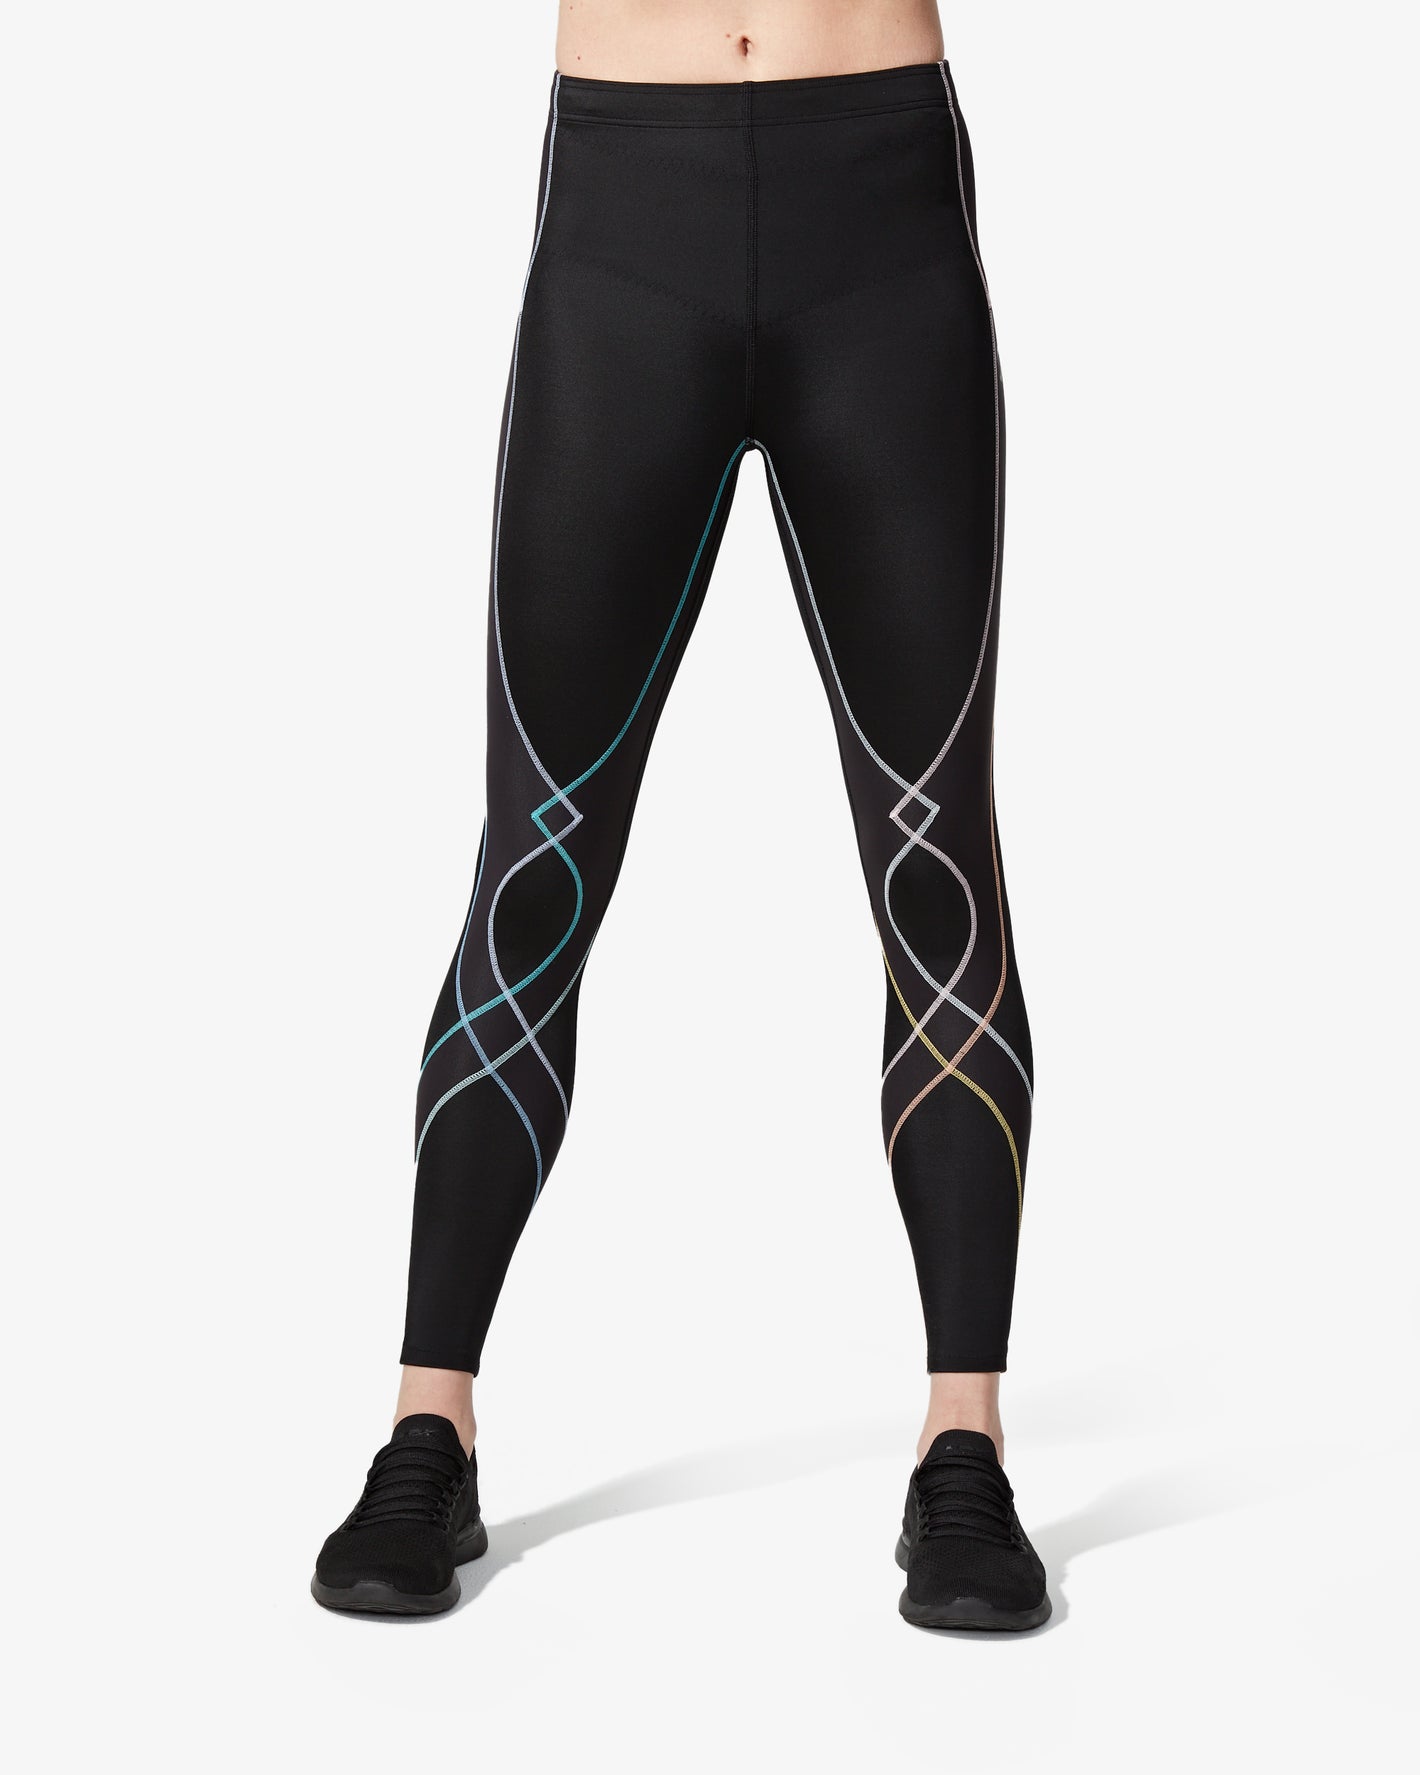 JUST RIDER Rider Full Length Compression Lower Tights Multi Sports